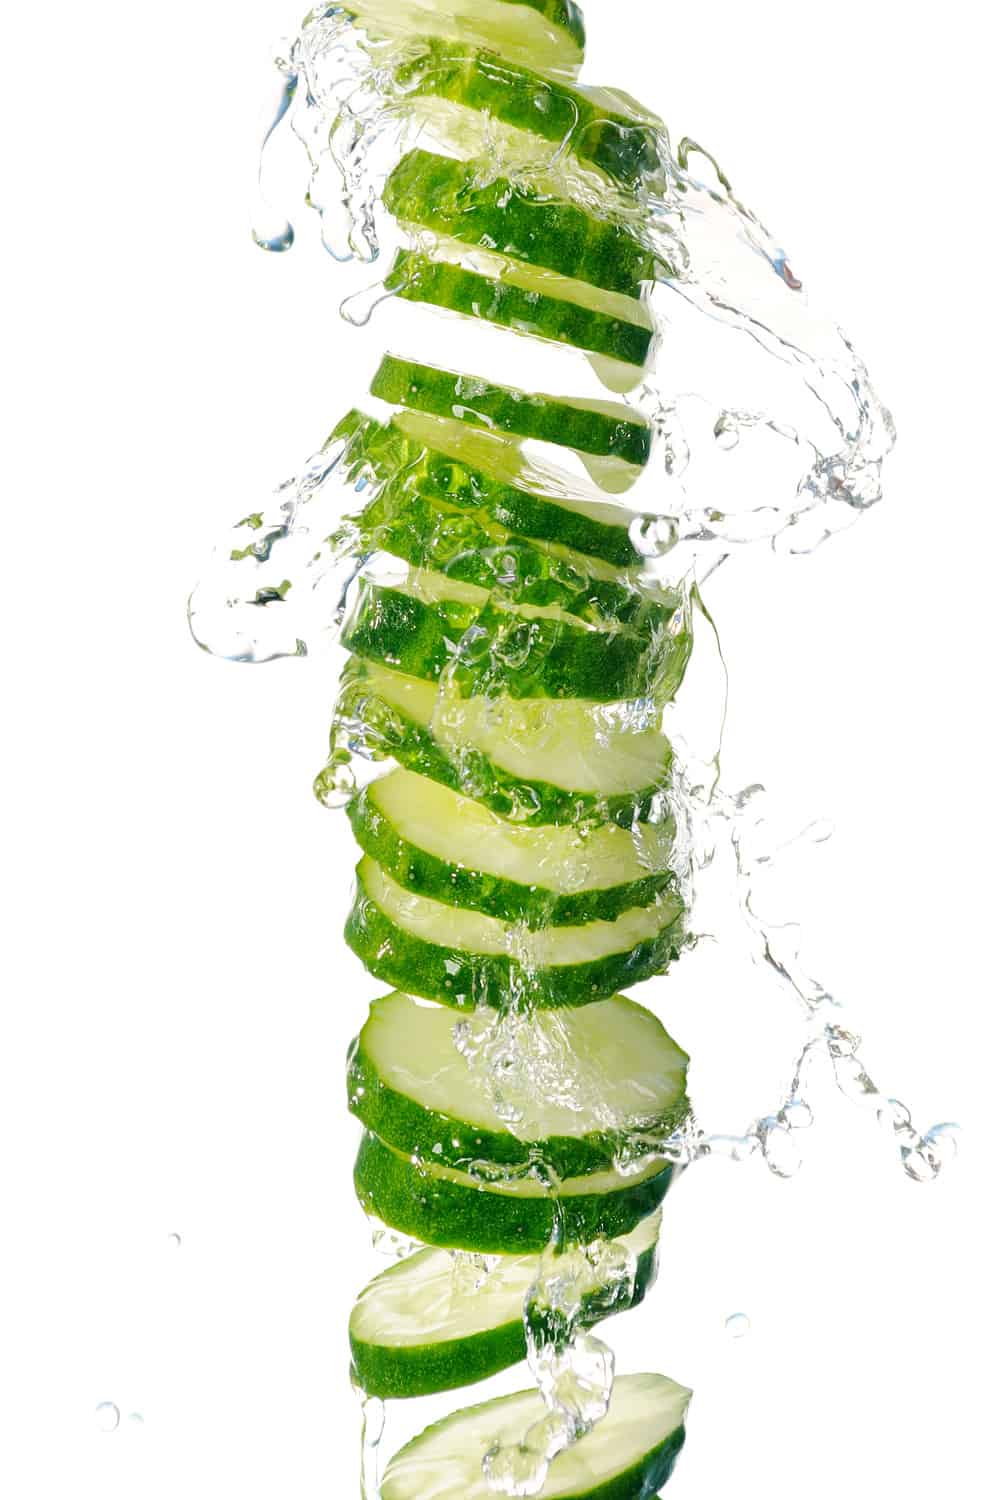 A slice of cucumber in the splash of water. Isolated on white